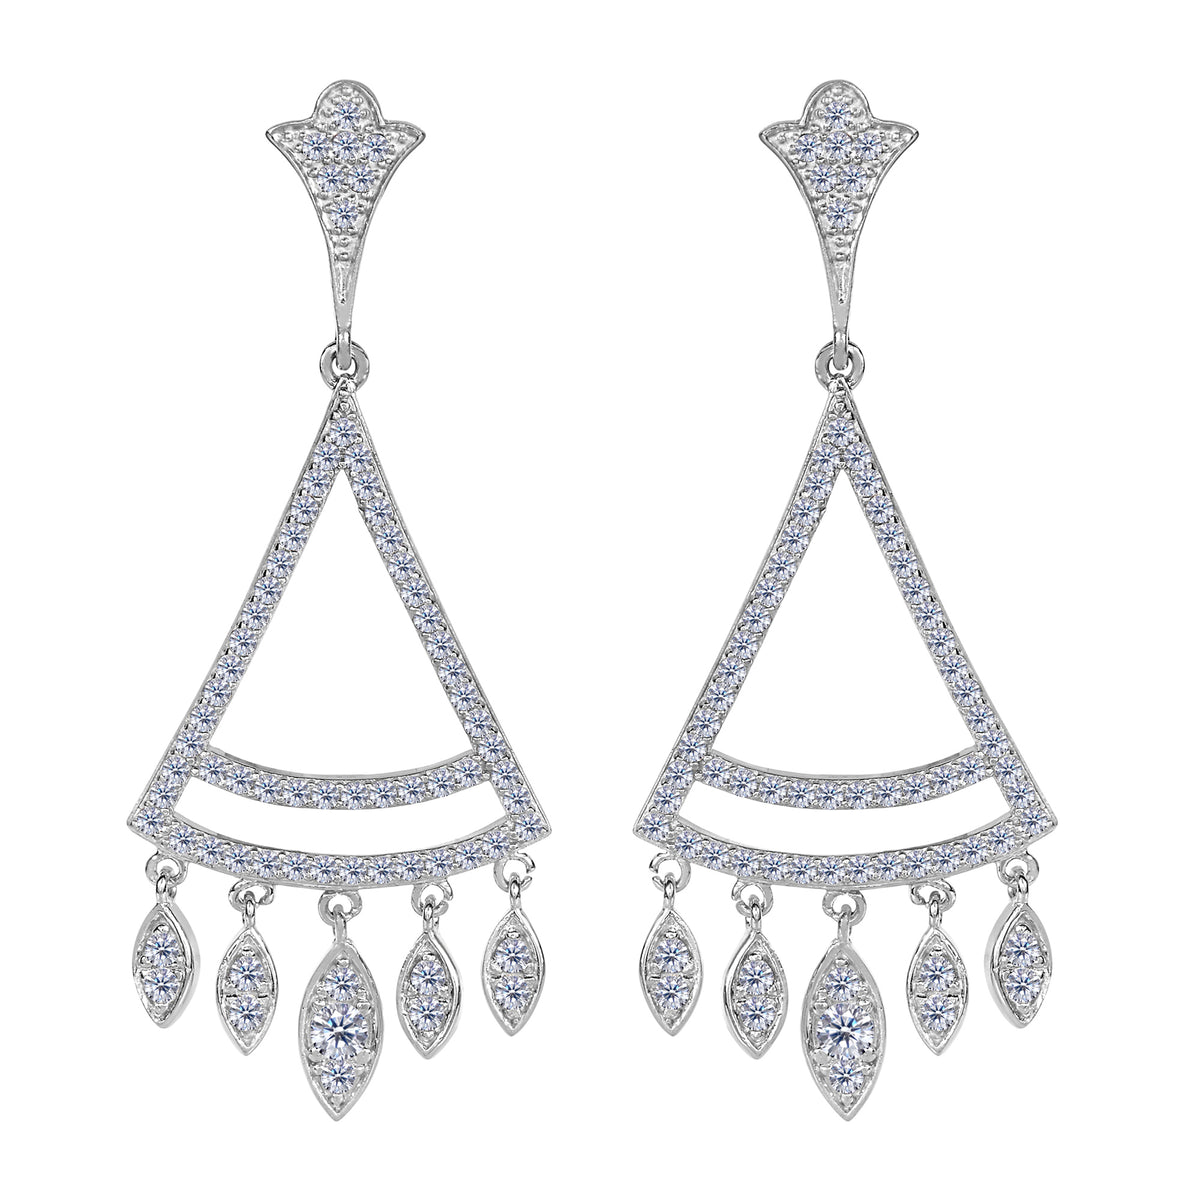 Sterling Silver And Cubic Zirconia Triangle Shaped Chandelier Earrings fine designer jewelry for men and women